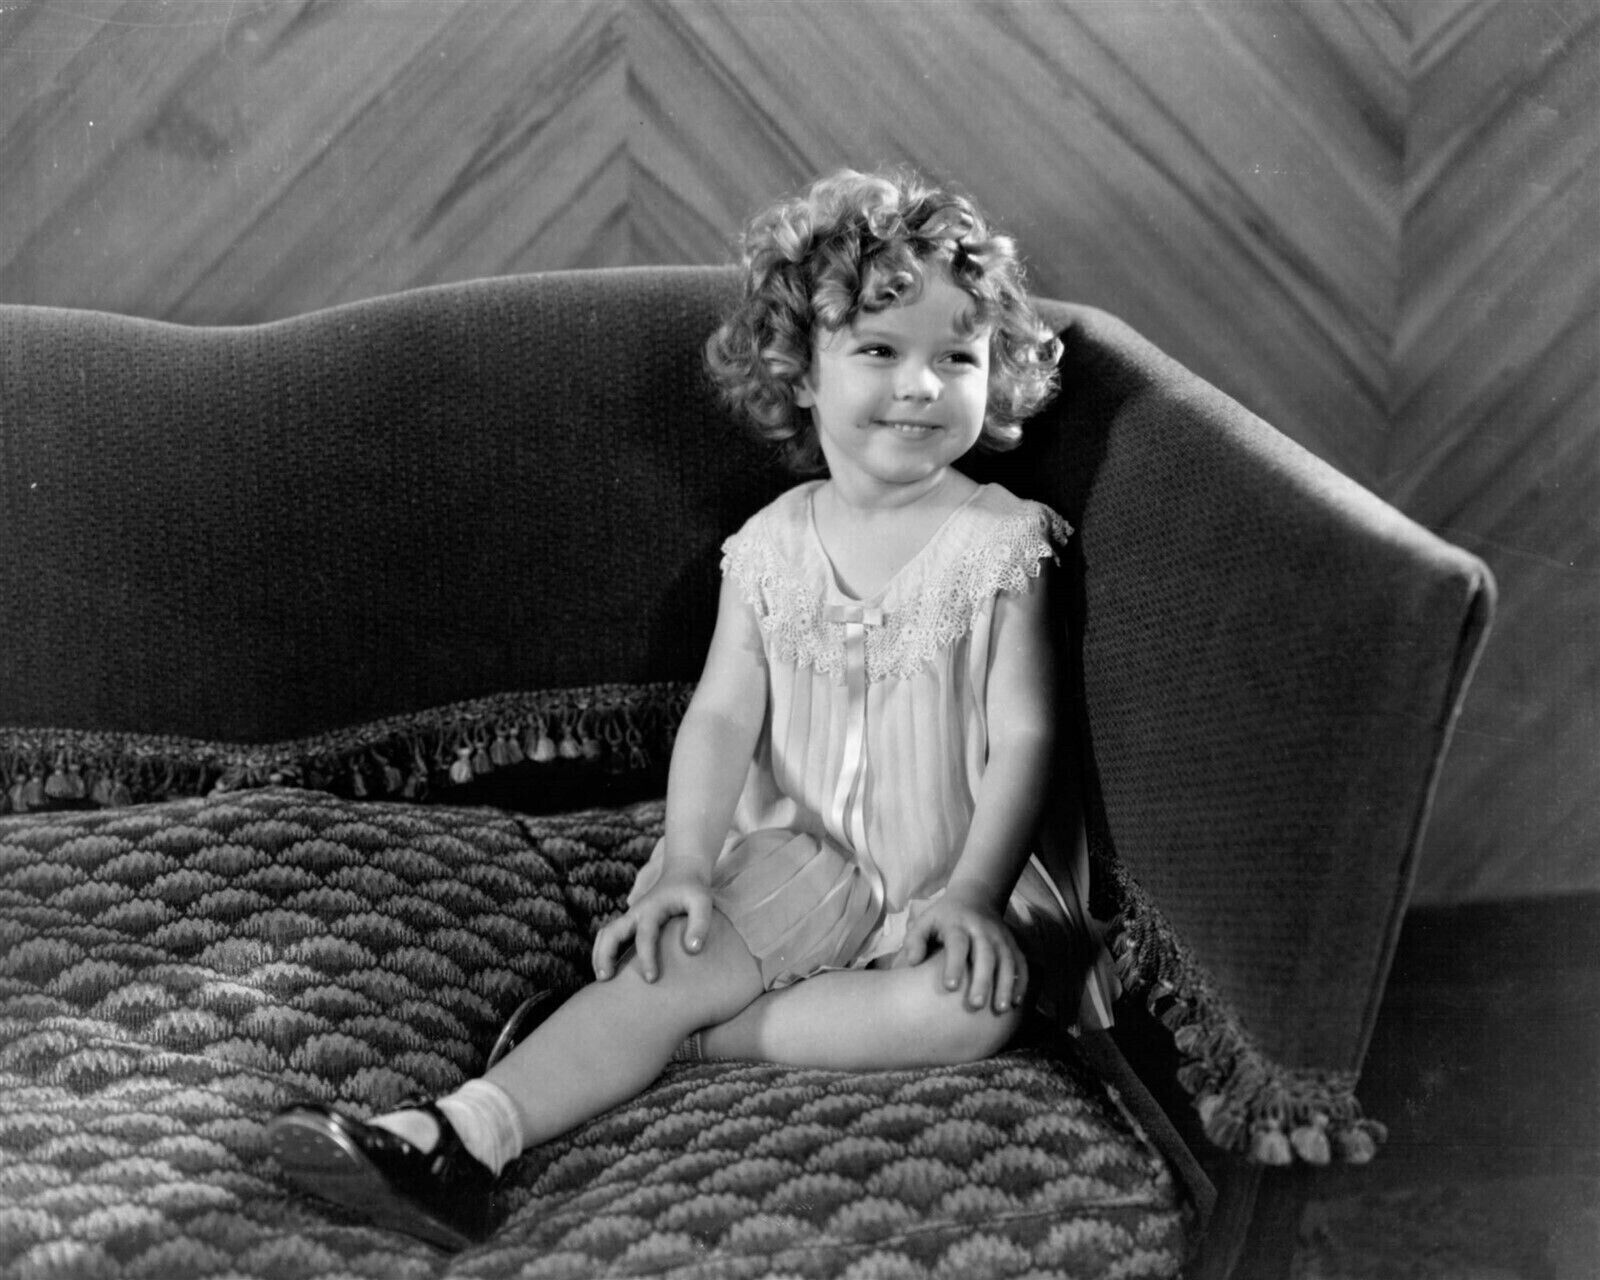 Shirley Temple sits on sofa smiling sweetly 4x6 inch photo